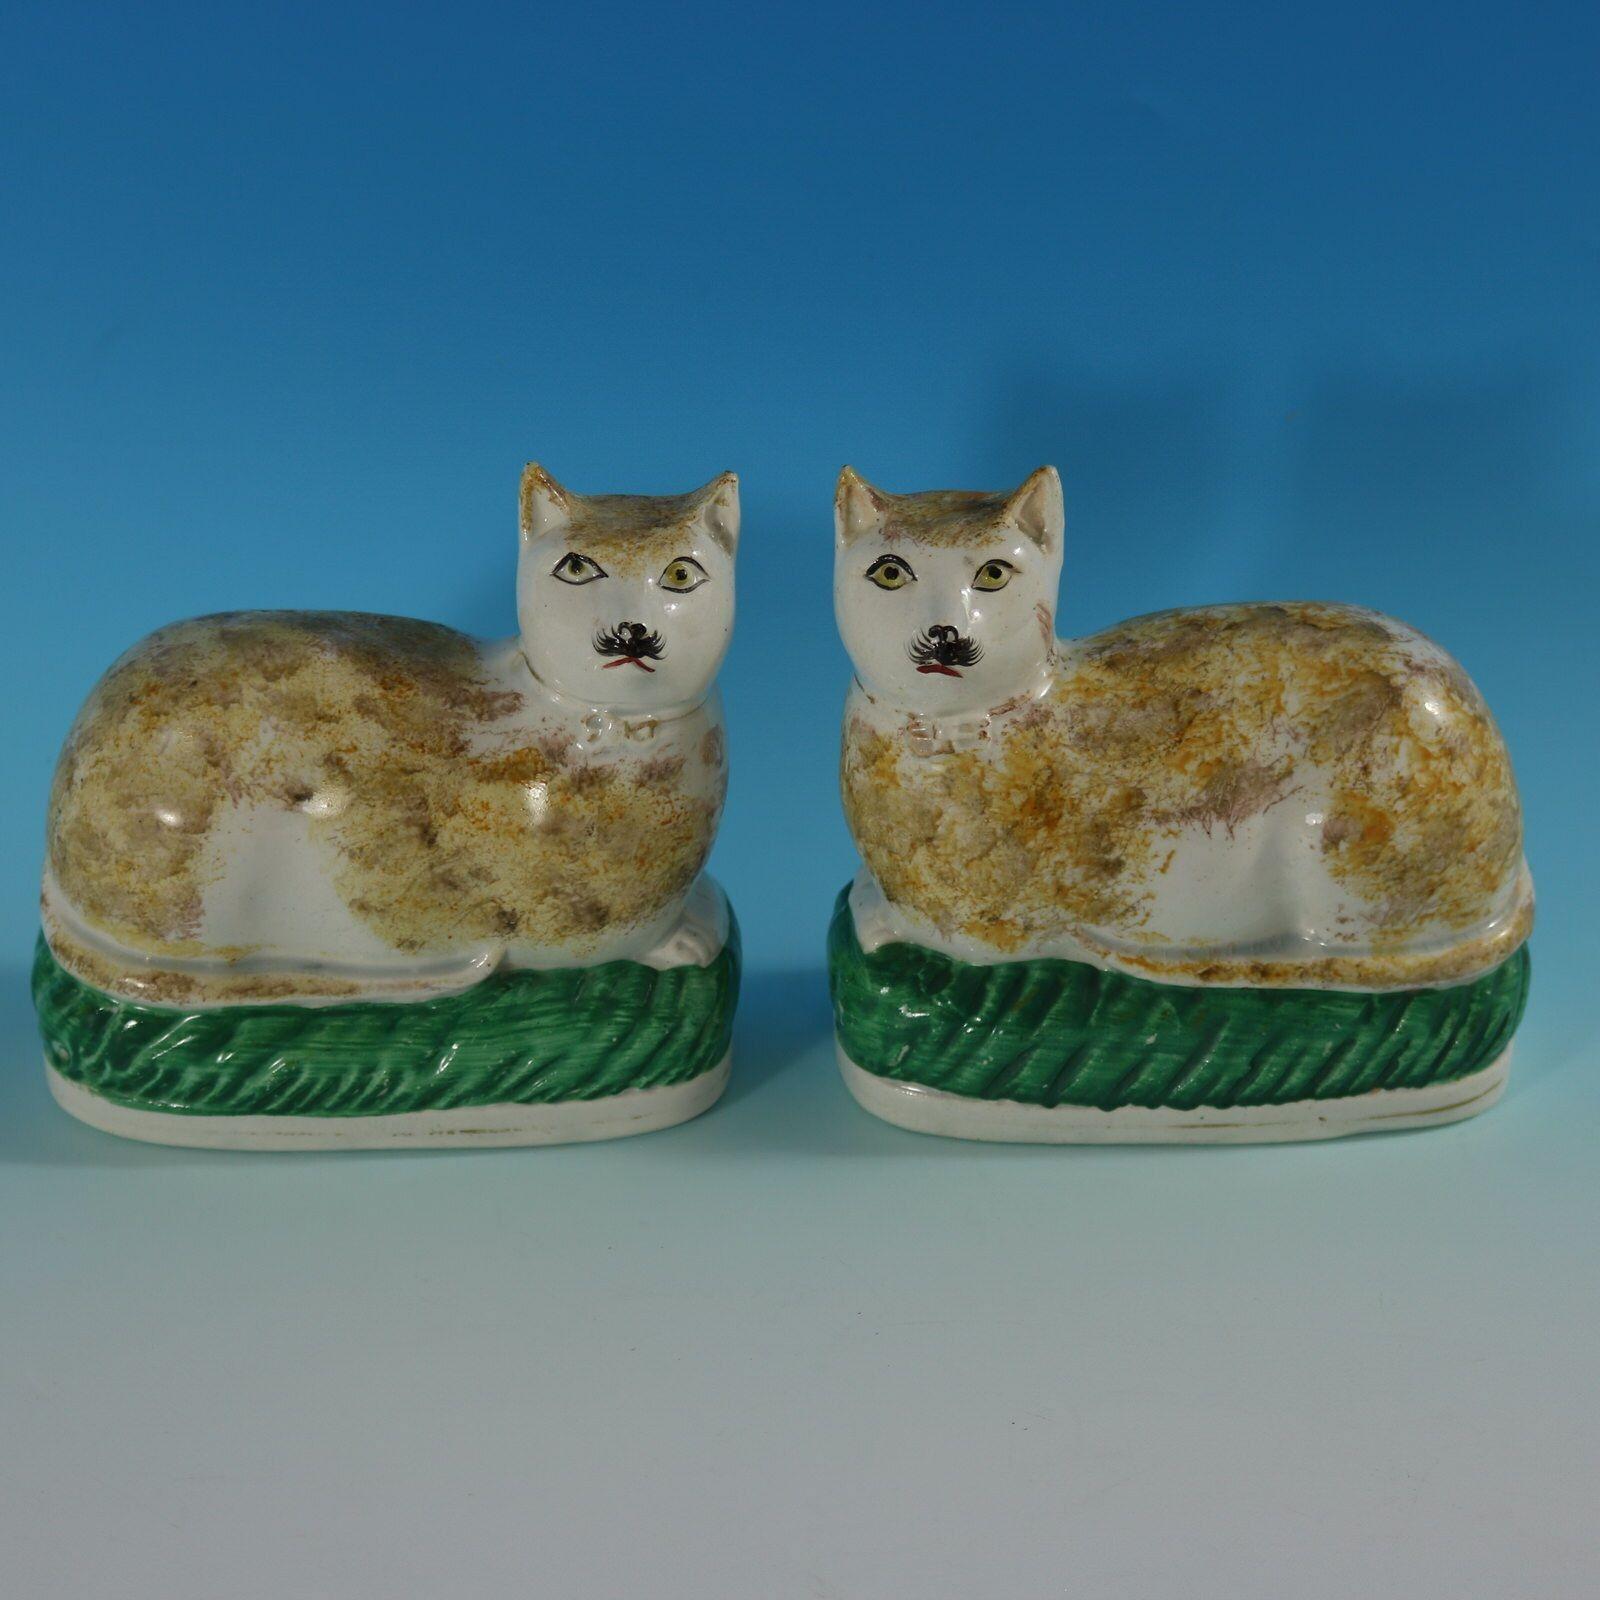 Pair of Staffordshire Pottery figures which feature a cat on a cushion, recumbent on an oval base. Dull gilt base line and embellishment.